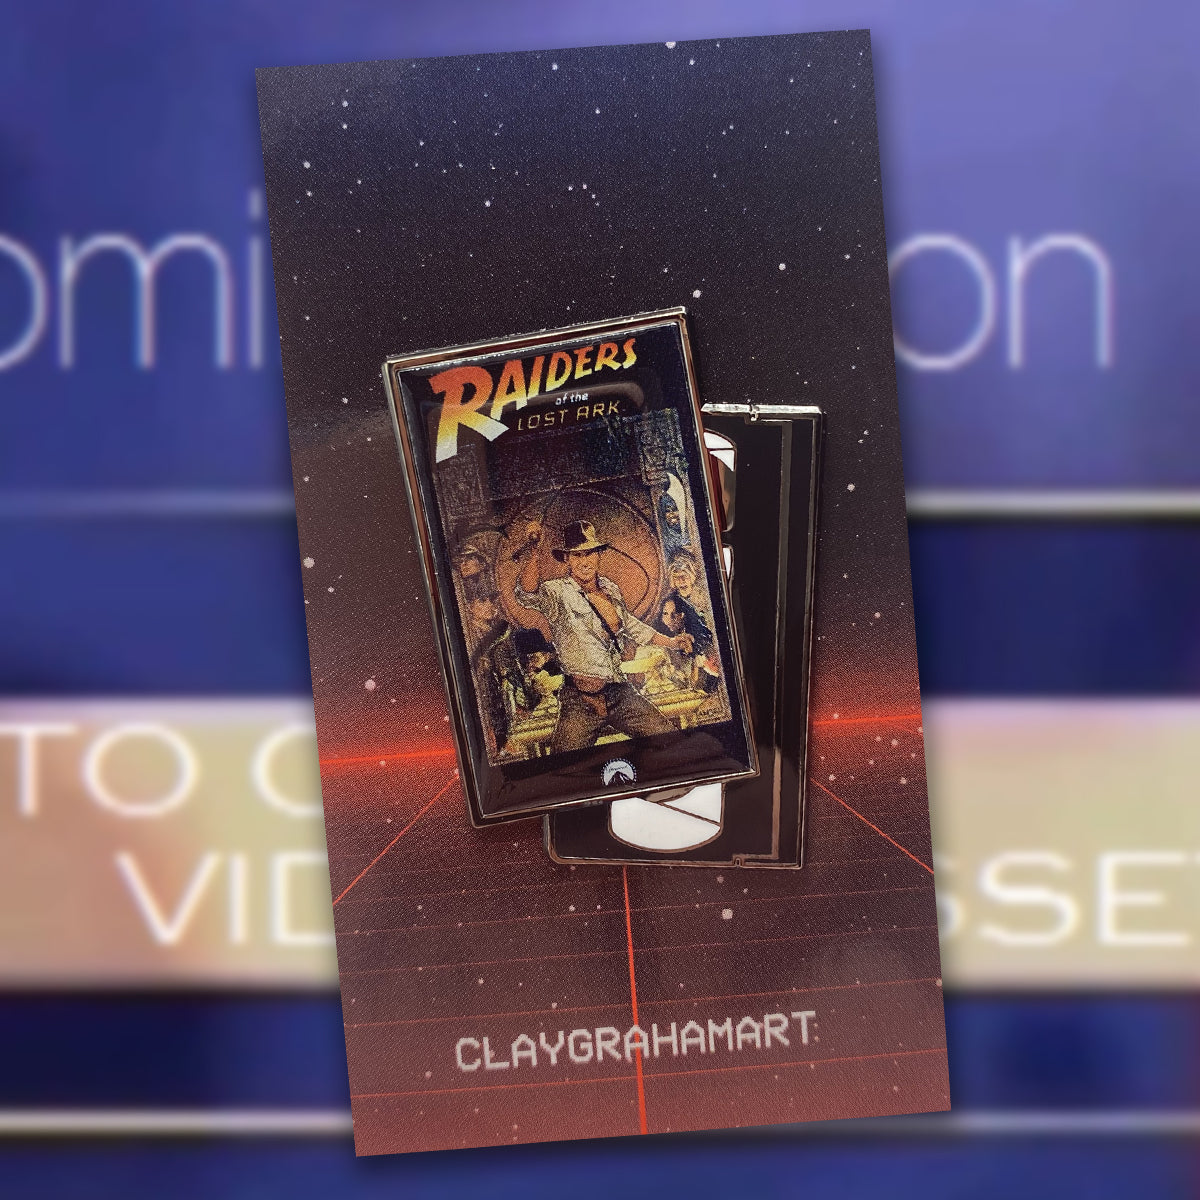 Now Available On VHS 1.75" hard enamel / digital offset pin